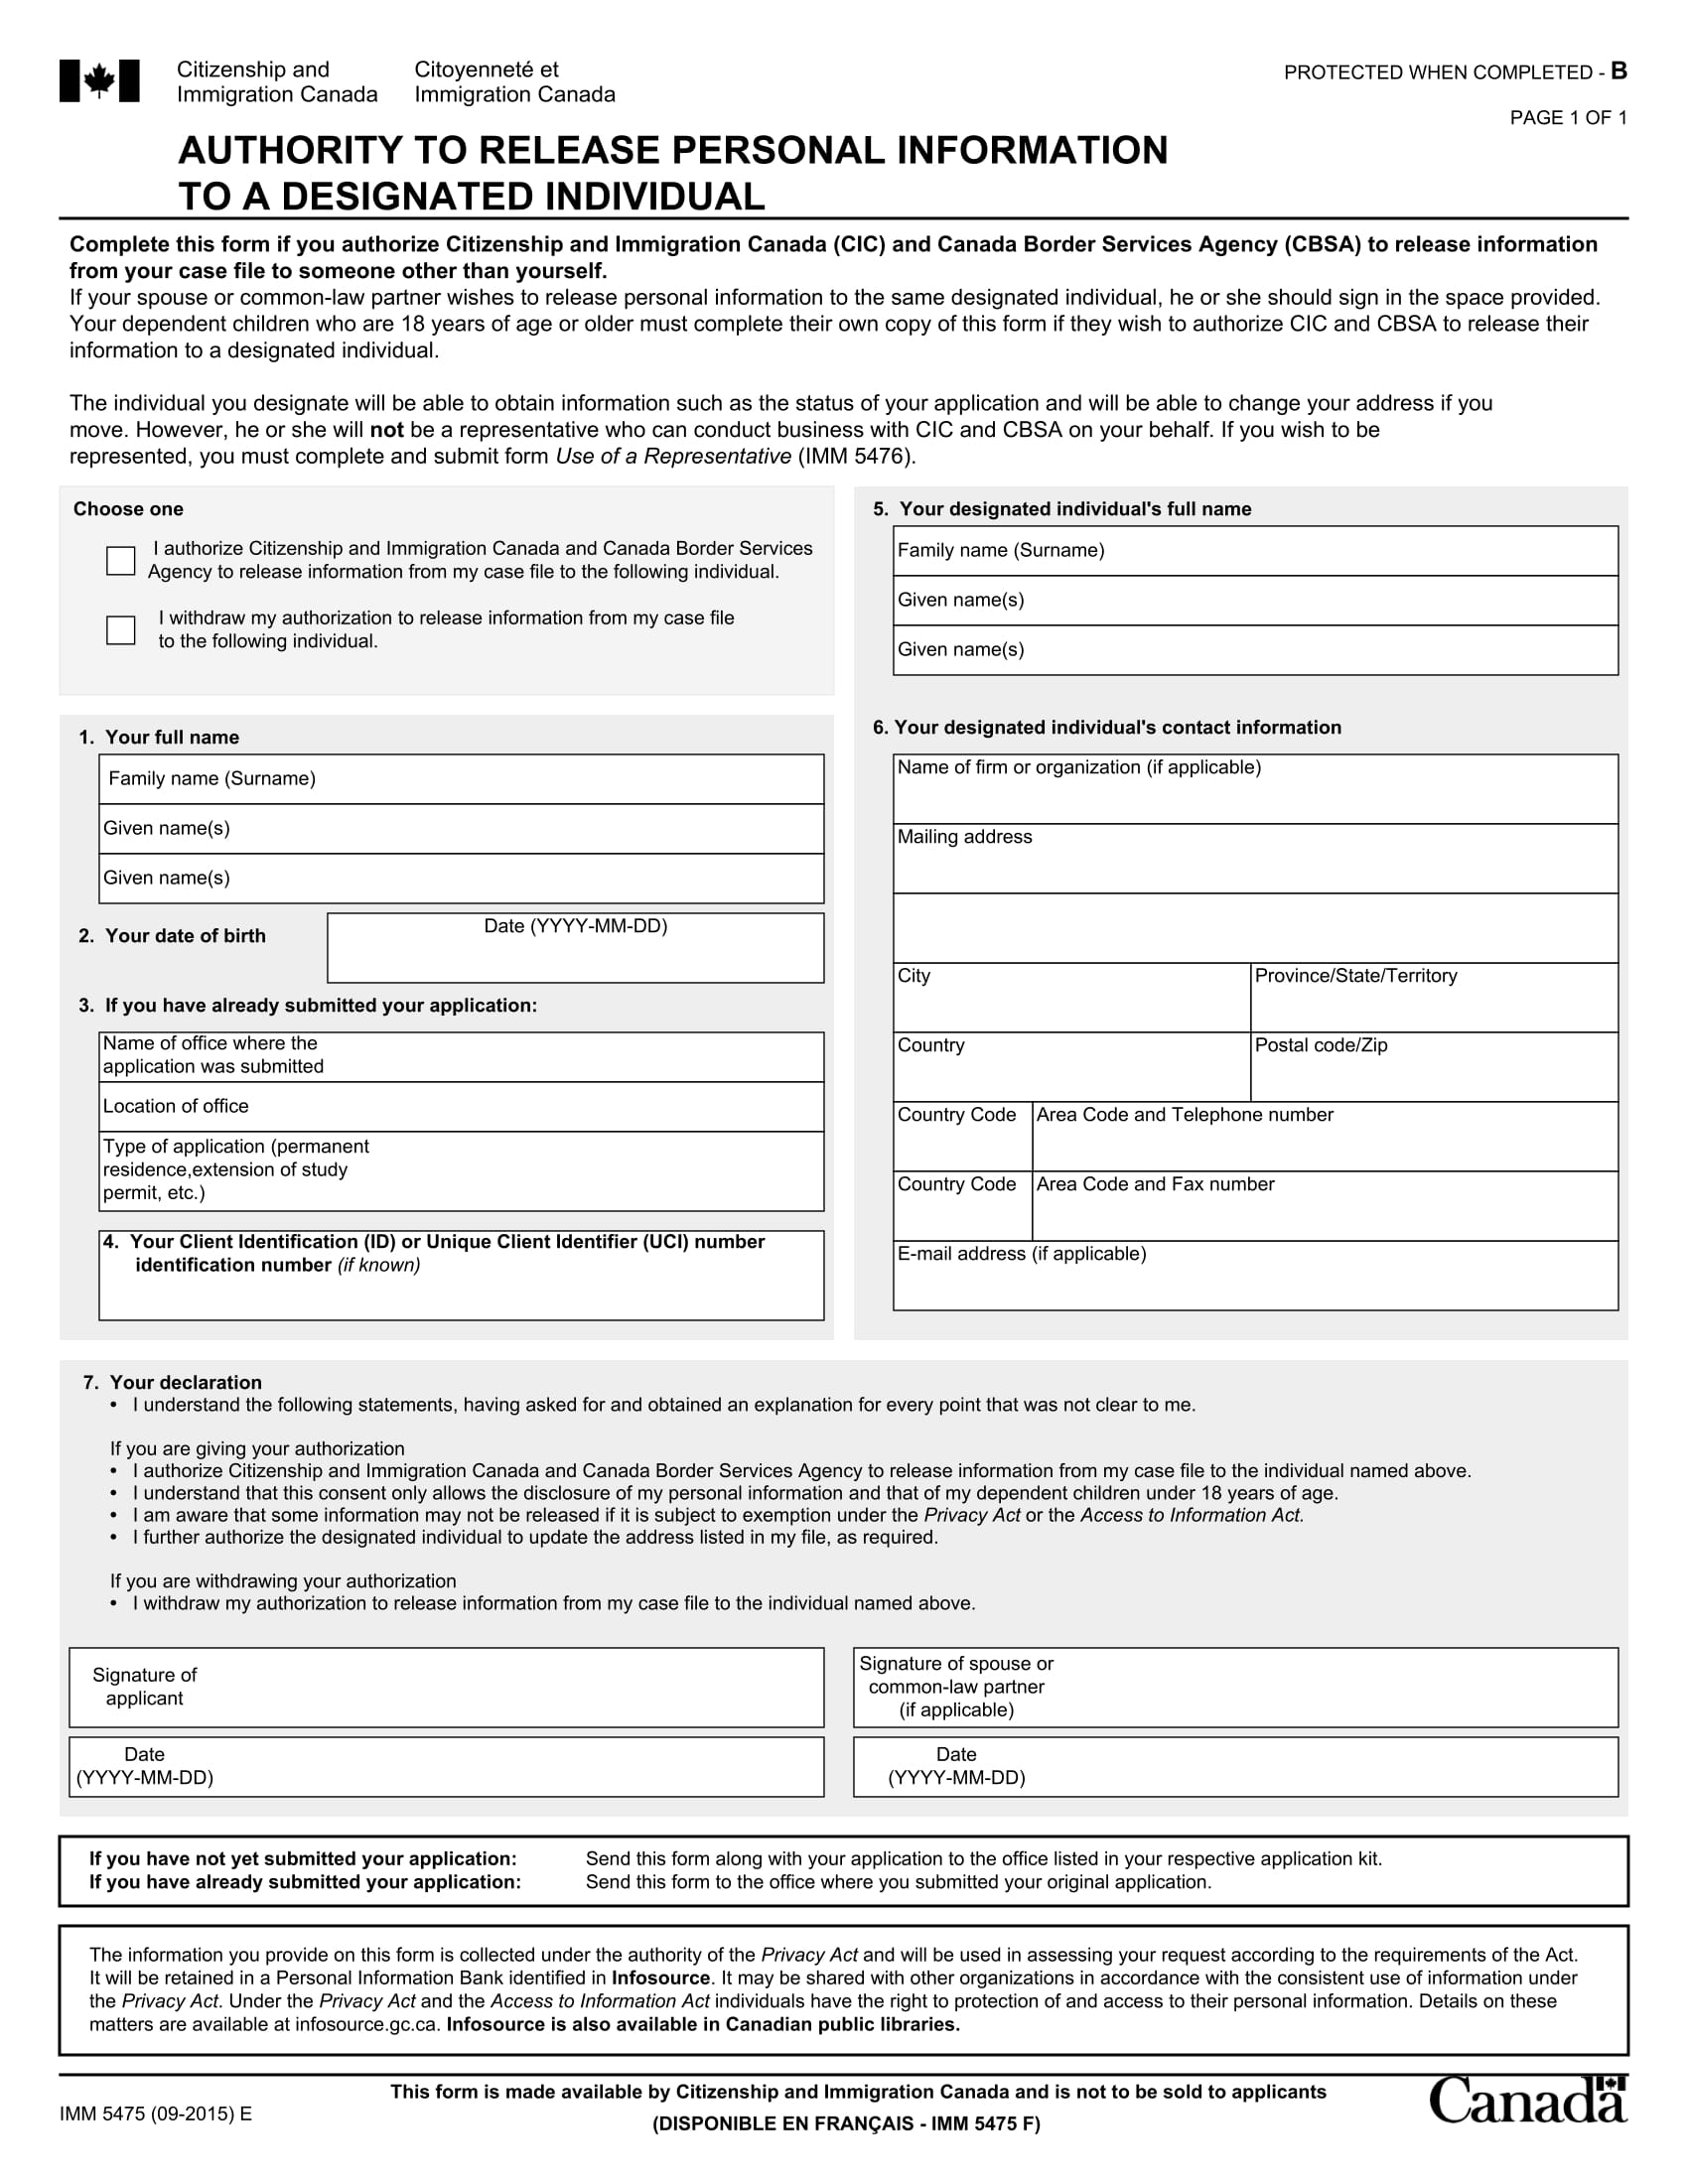 authority to release personal information form 1